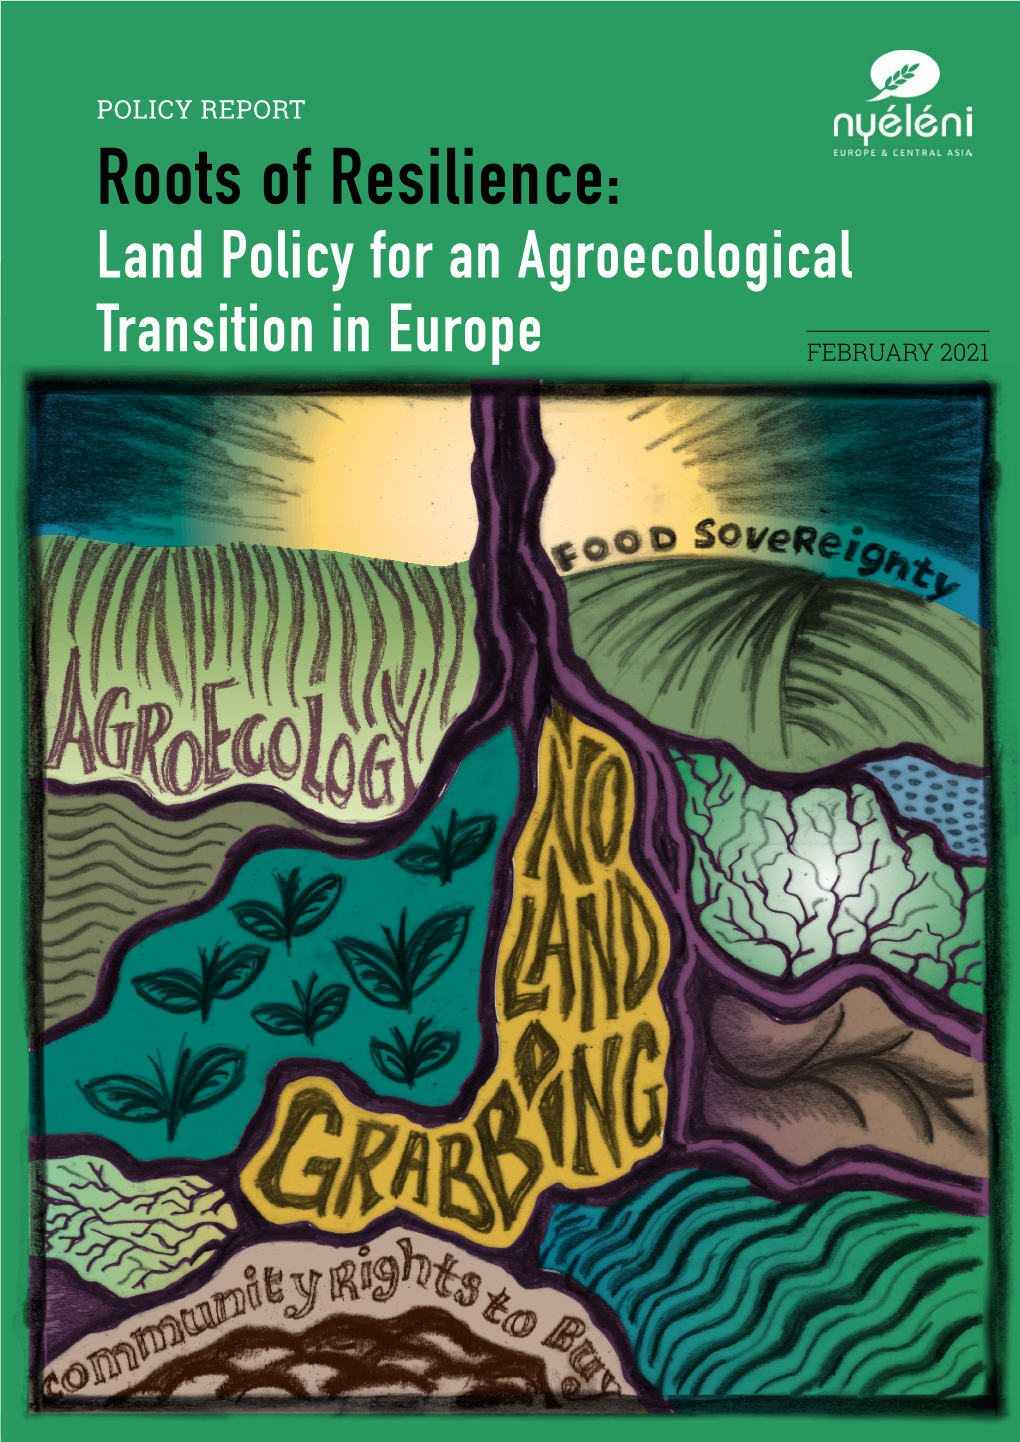 Roots of Resilience: Land Policy for an Agroecological Transition in Europe